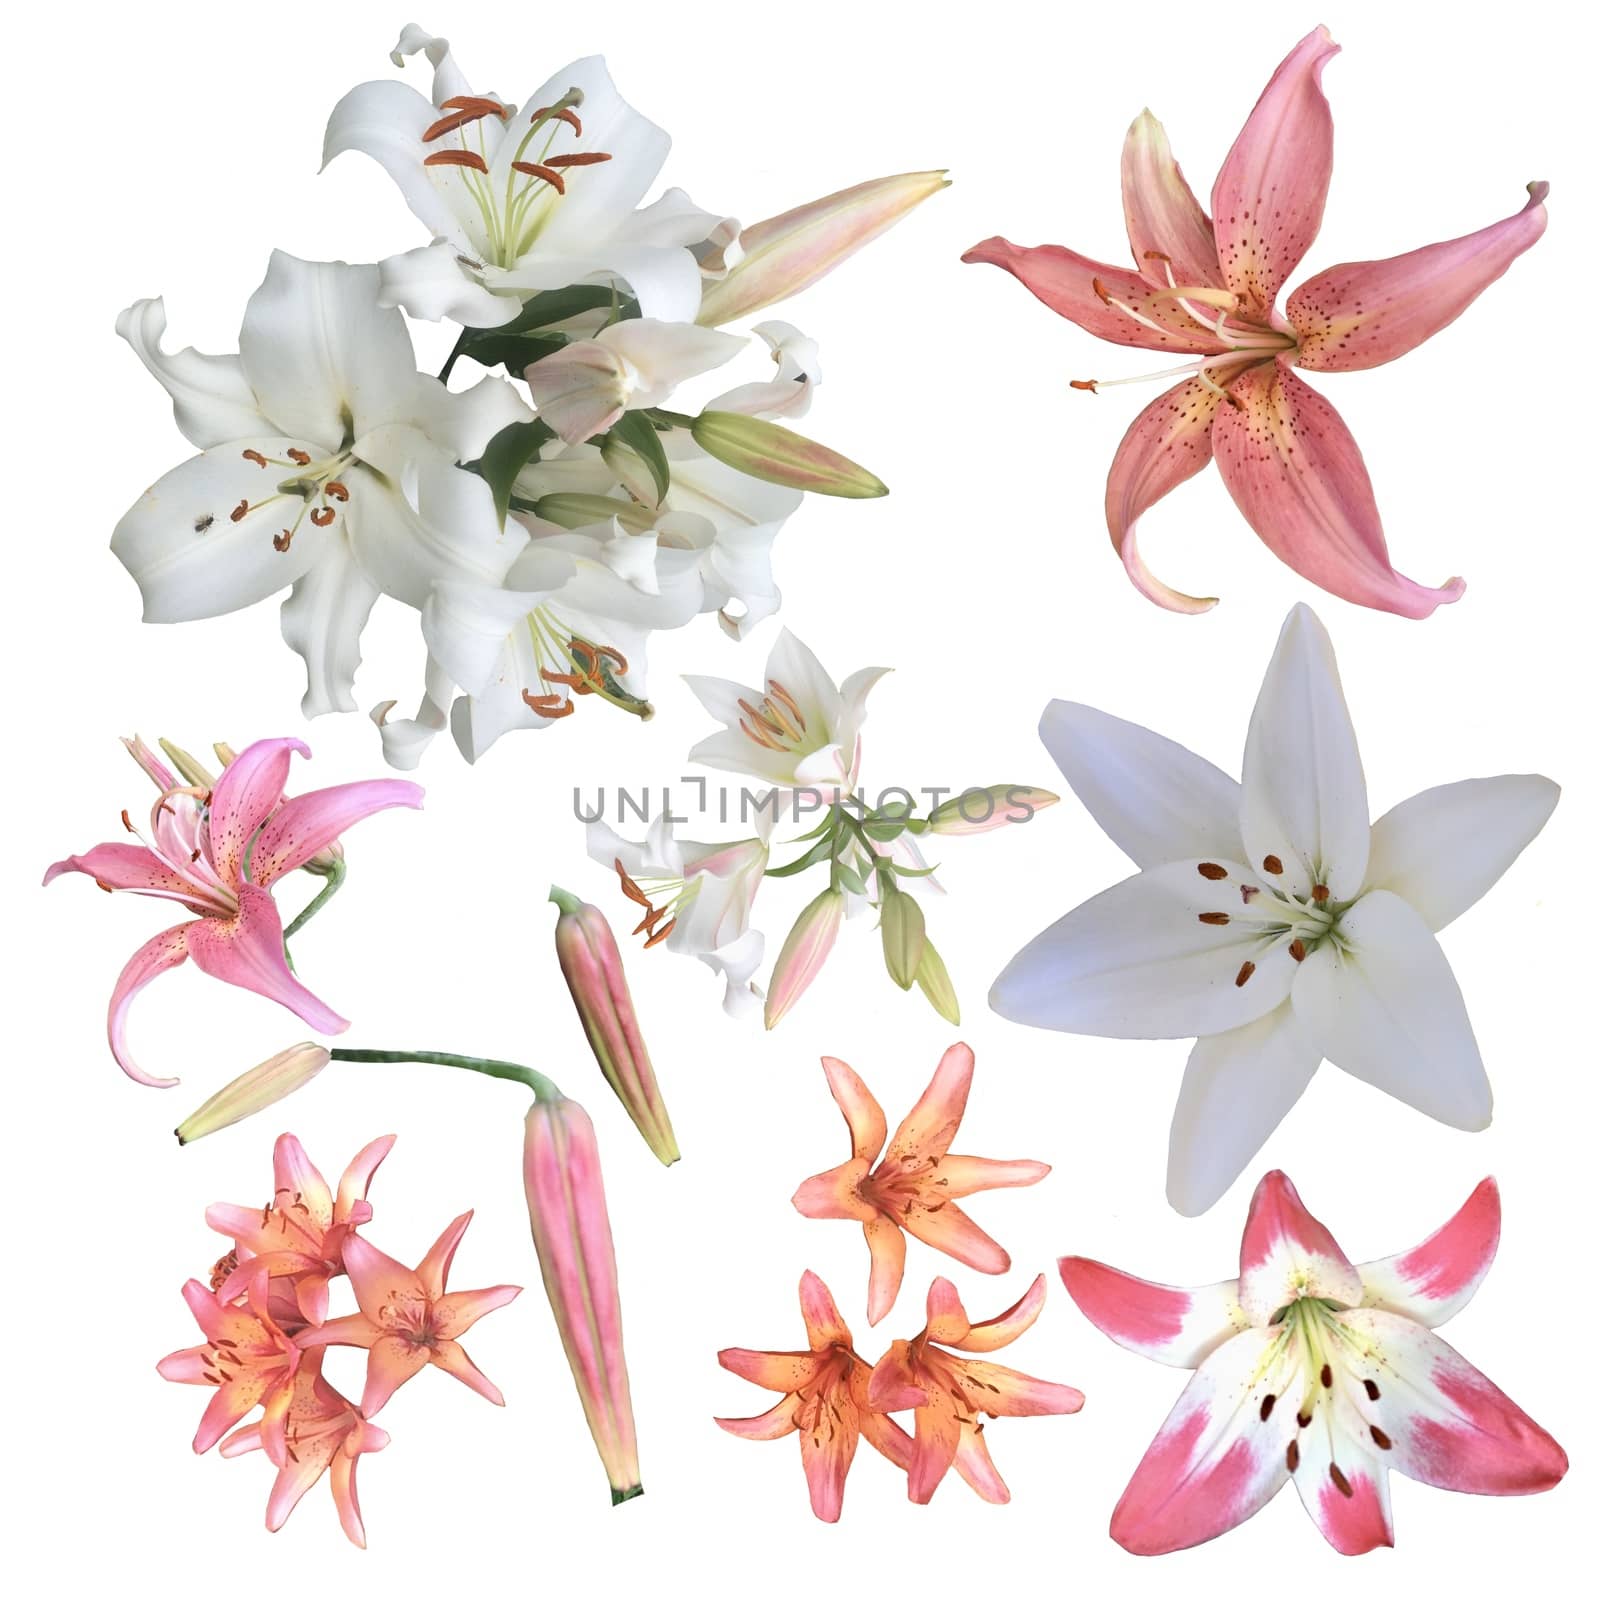 Collection of white and pink lilies  by Margolana